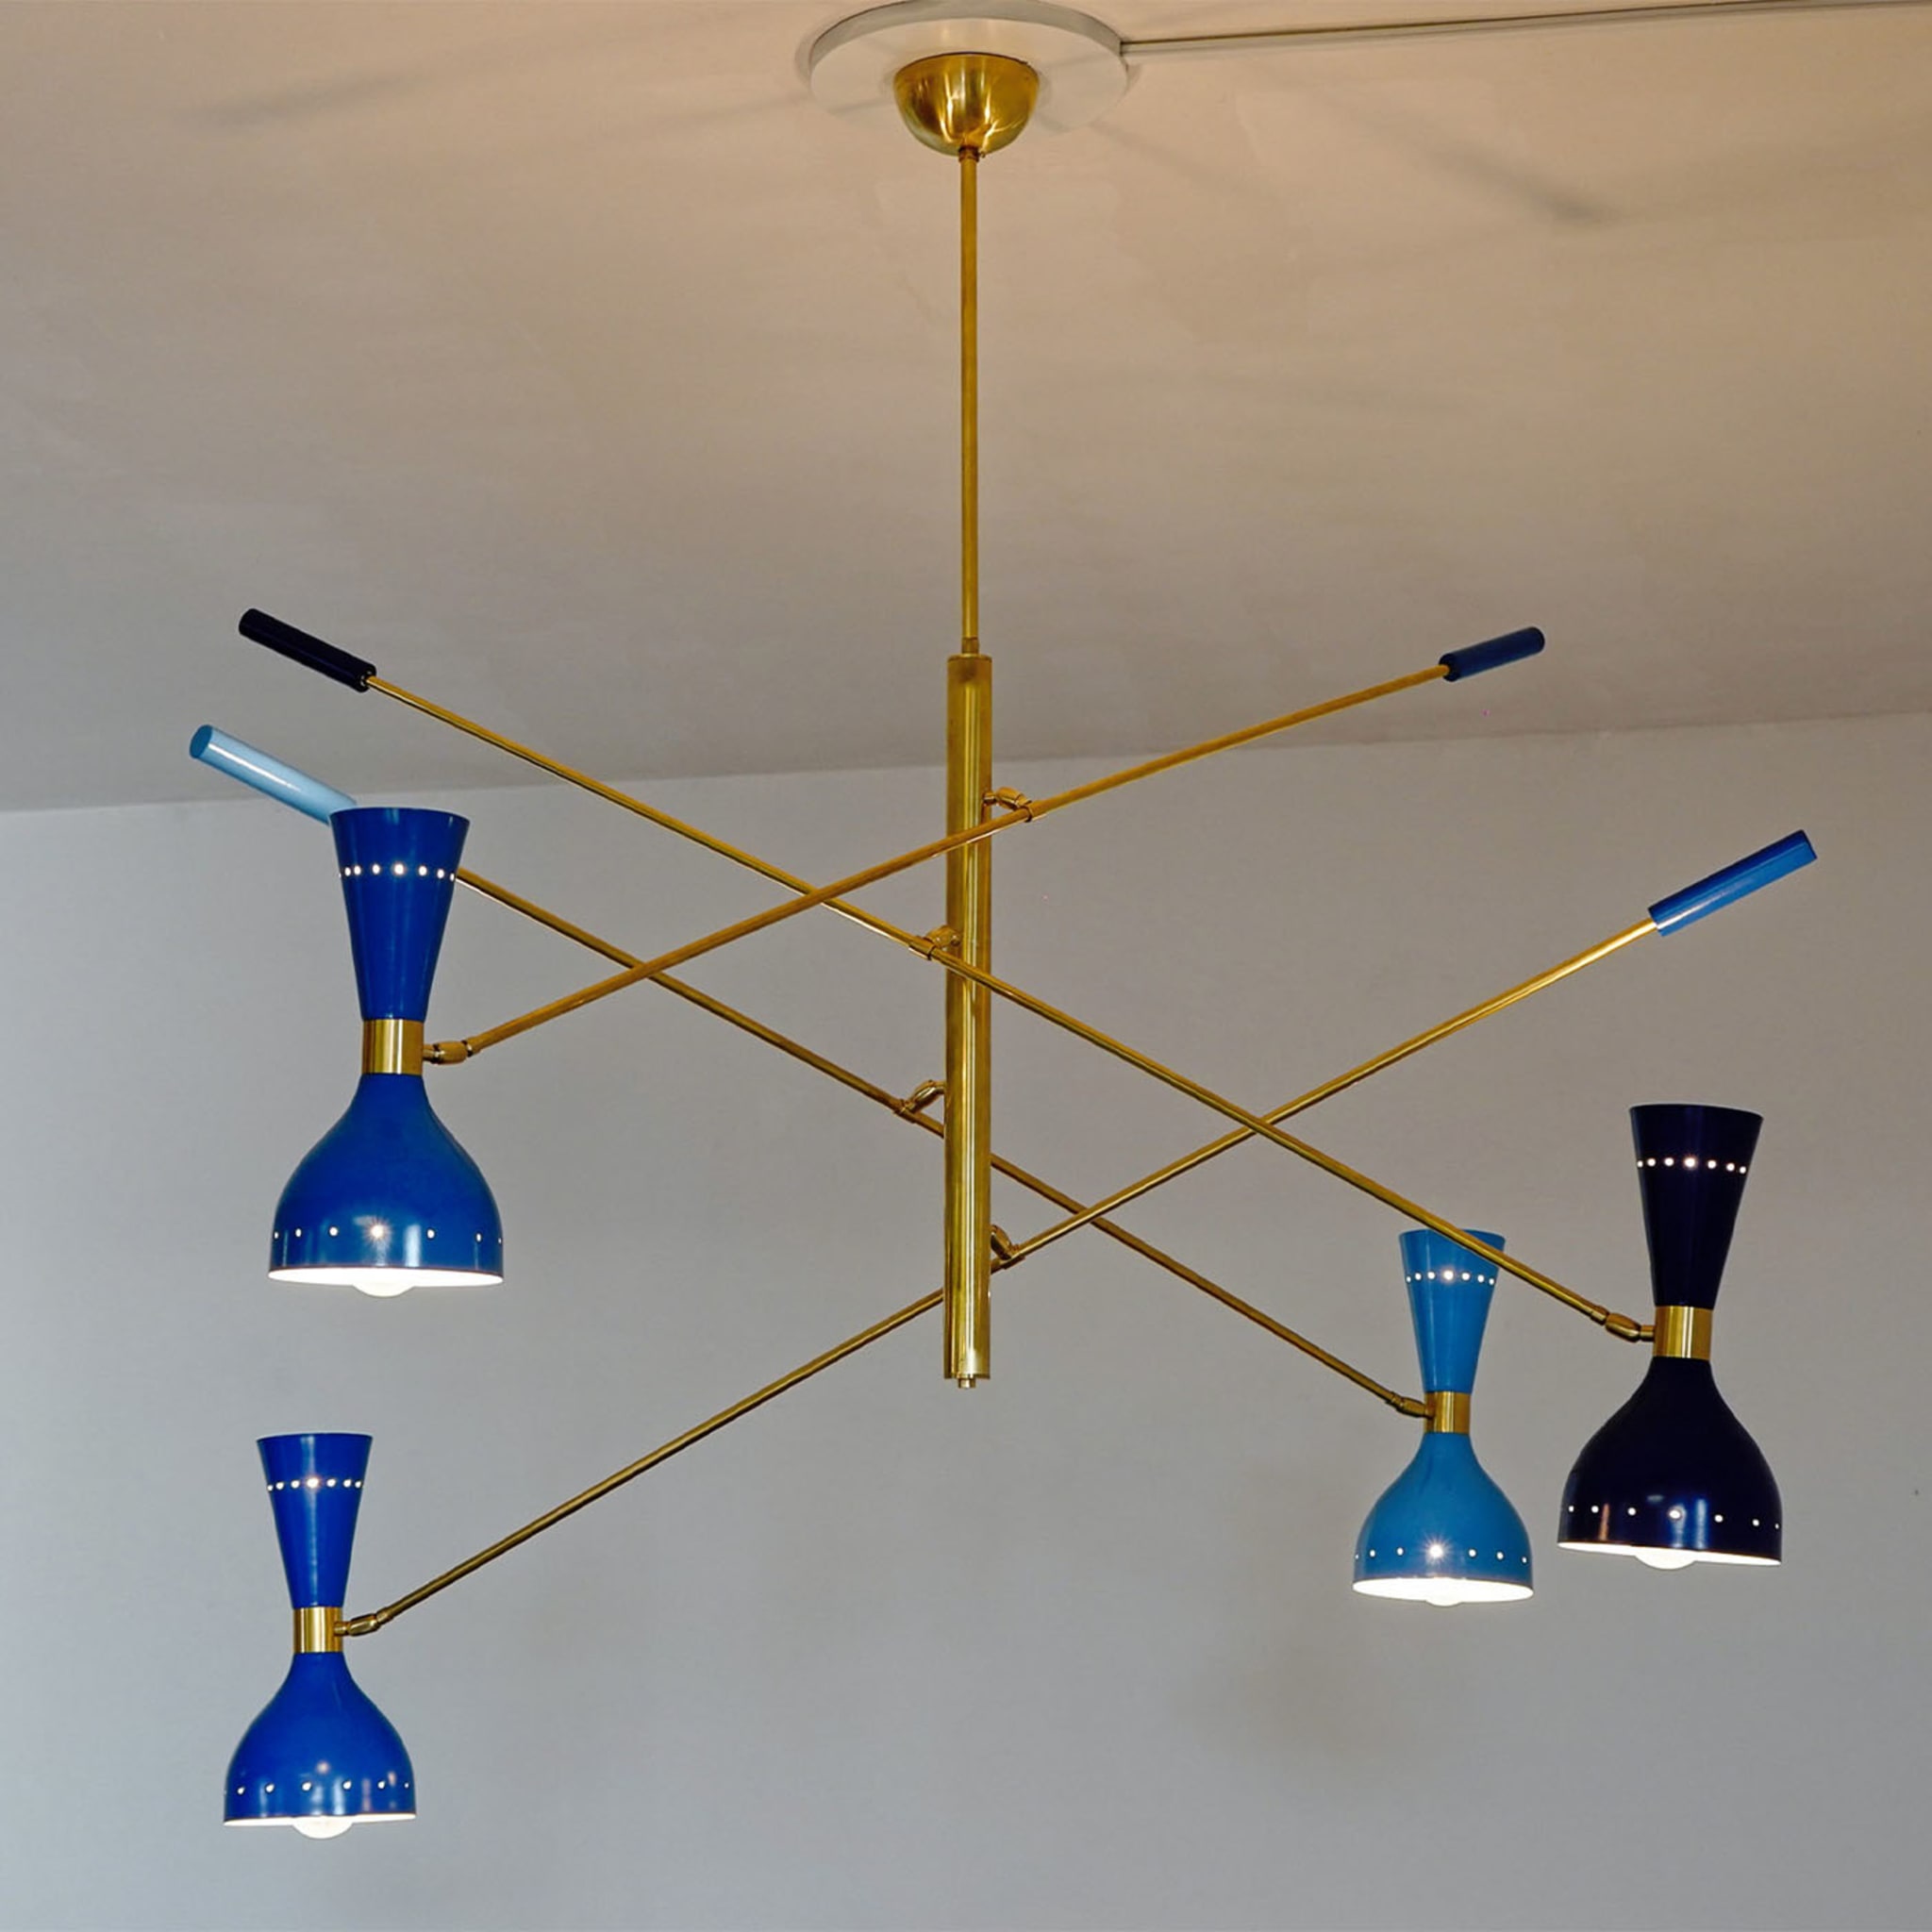 Contrappeso Chandelier, 4 hues of blue "Quadriennale" - Alternative view 1